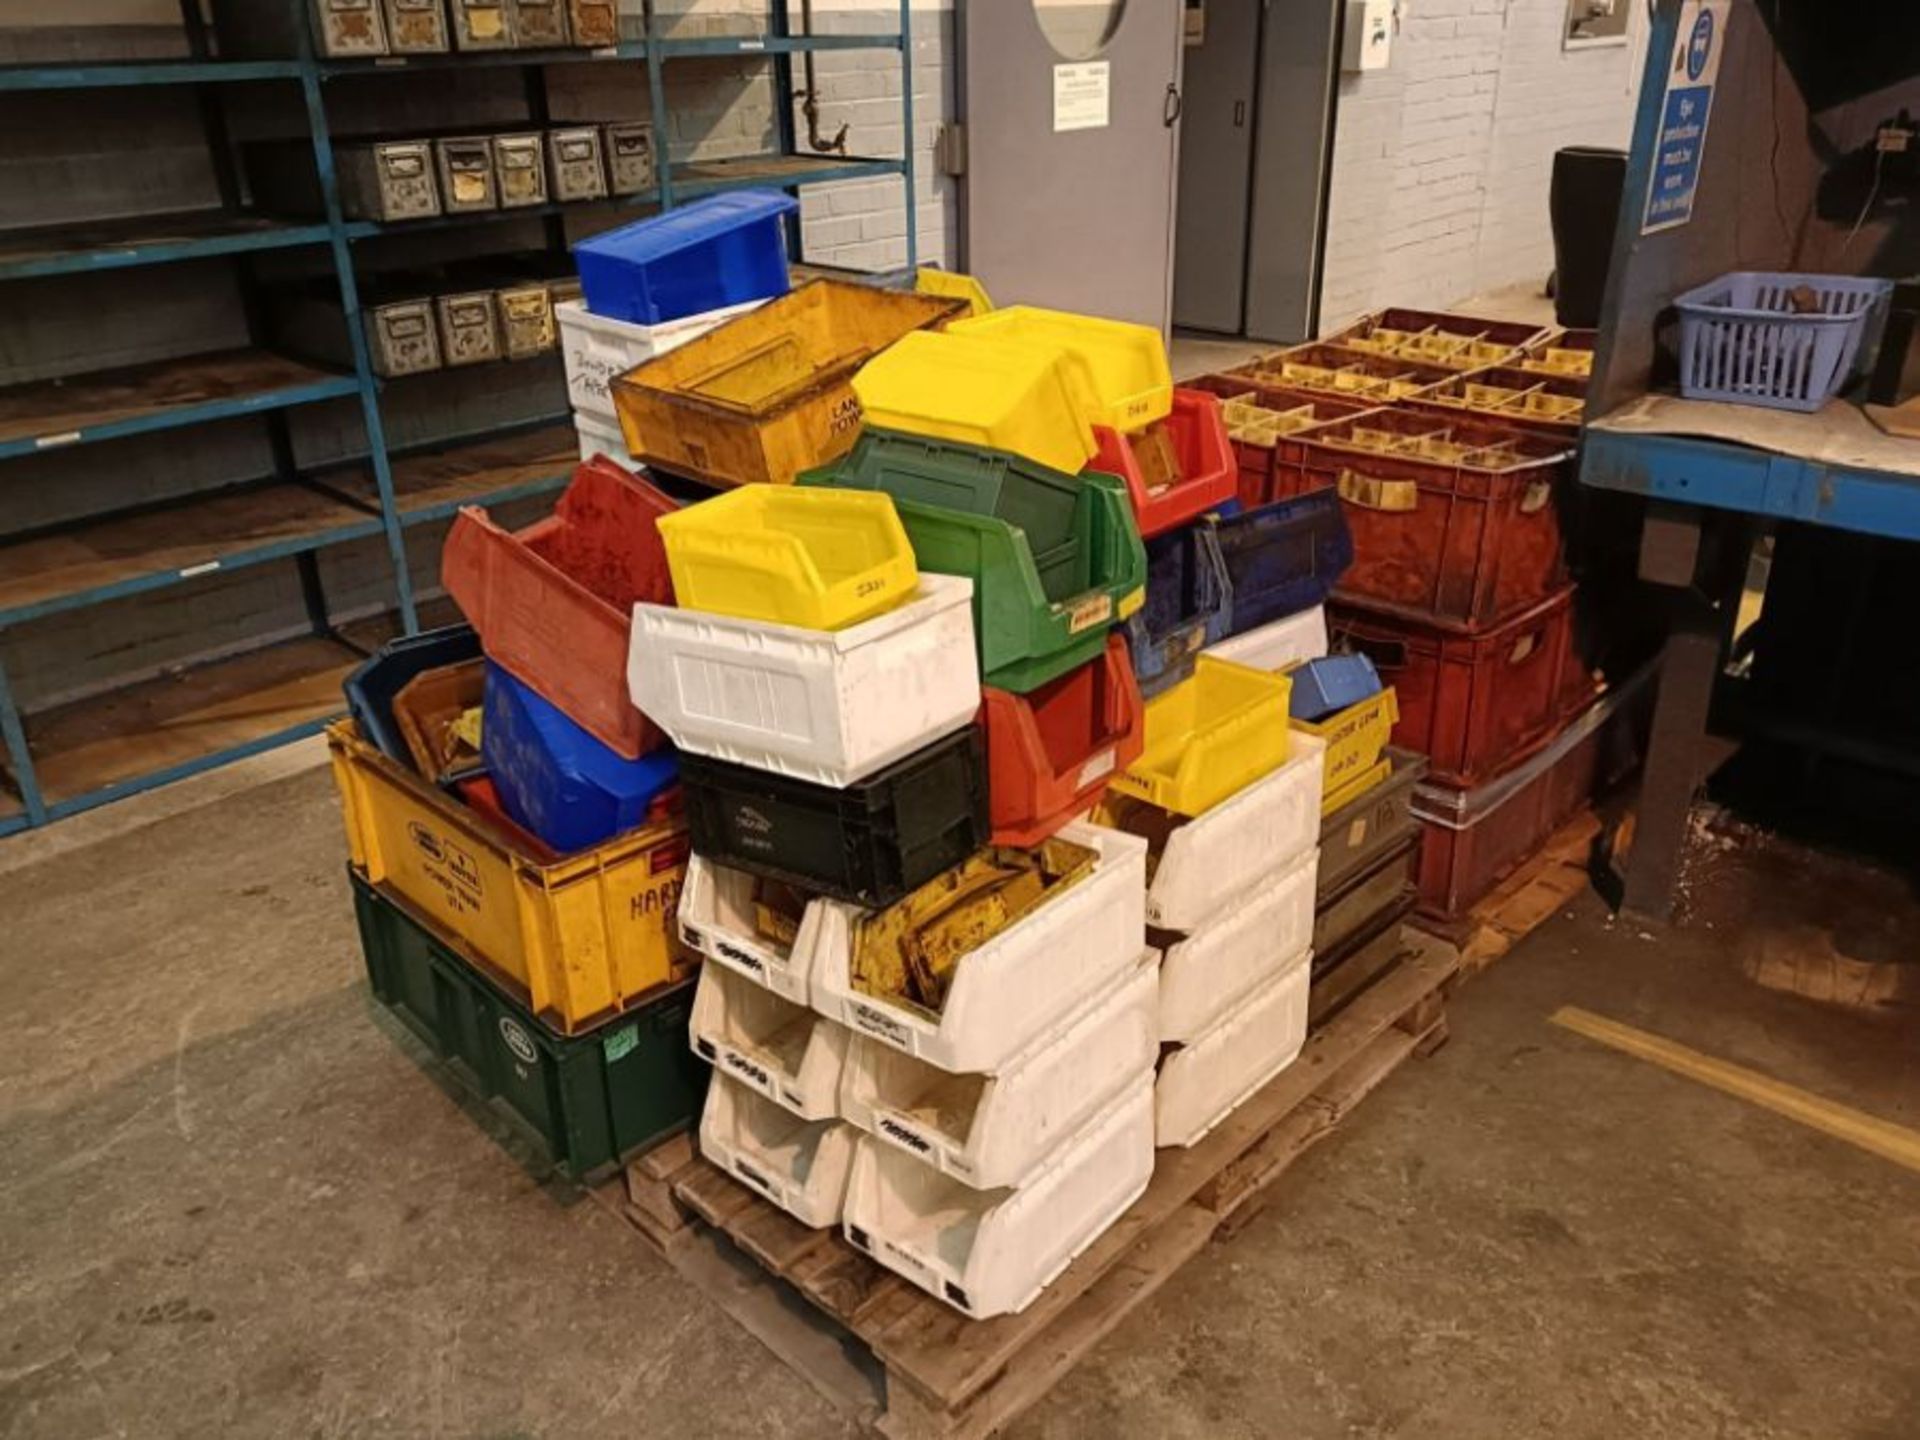 18 plastic crates and 70 lin bins - Image 2 of 2